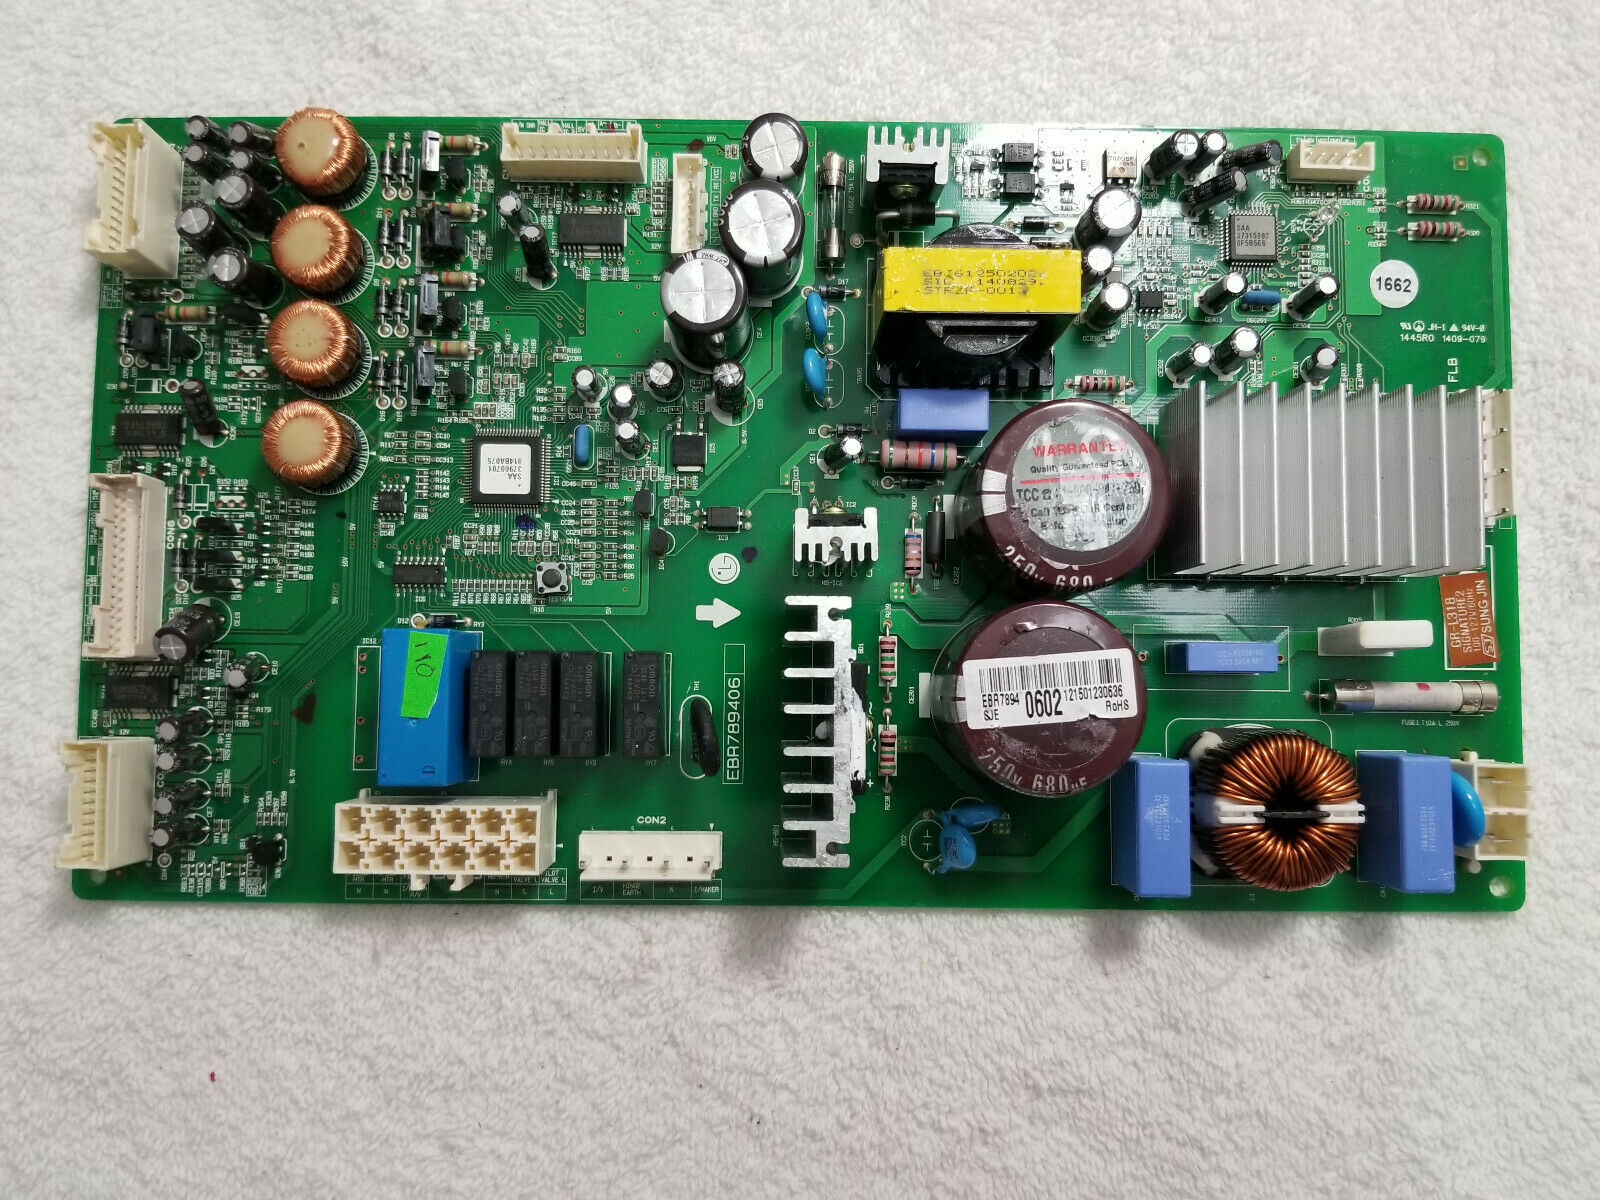 Primary image for LG Refrigerator Electronic Control Board EBR78940602